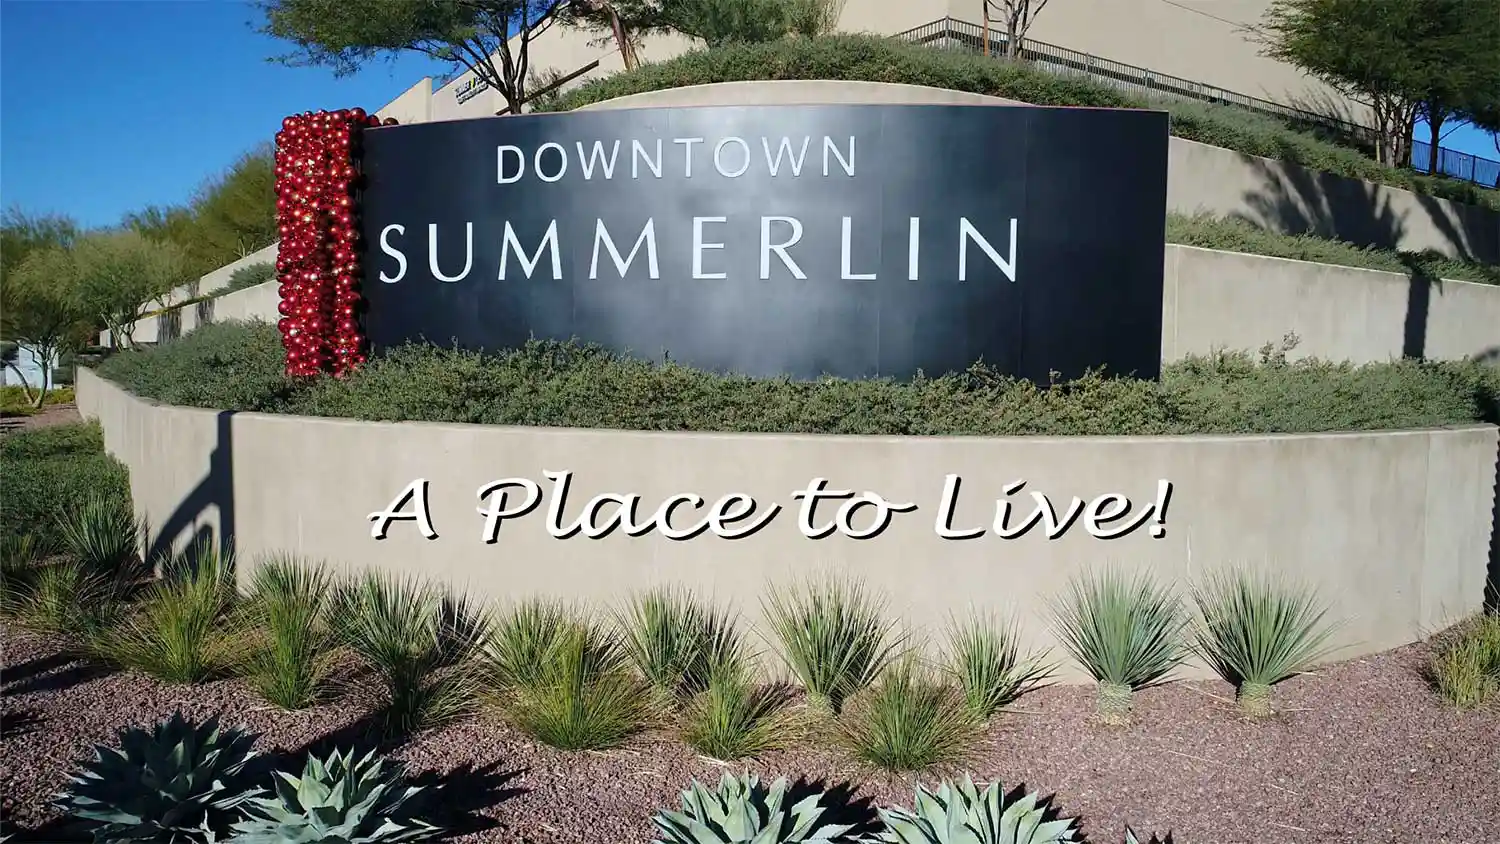 Summerln - a Place to Live, this image is of the Downtown Summerlin sign